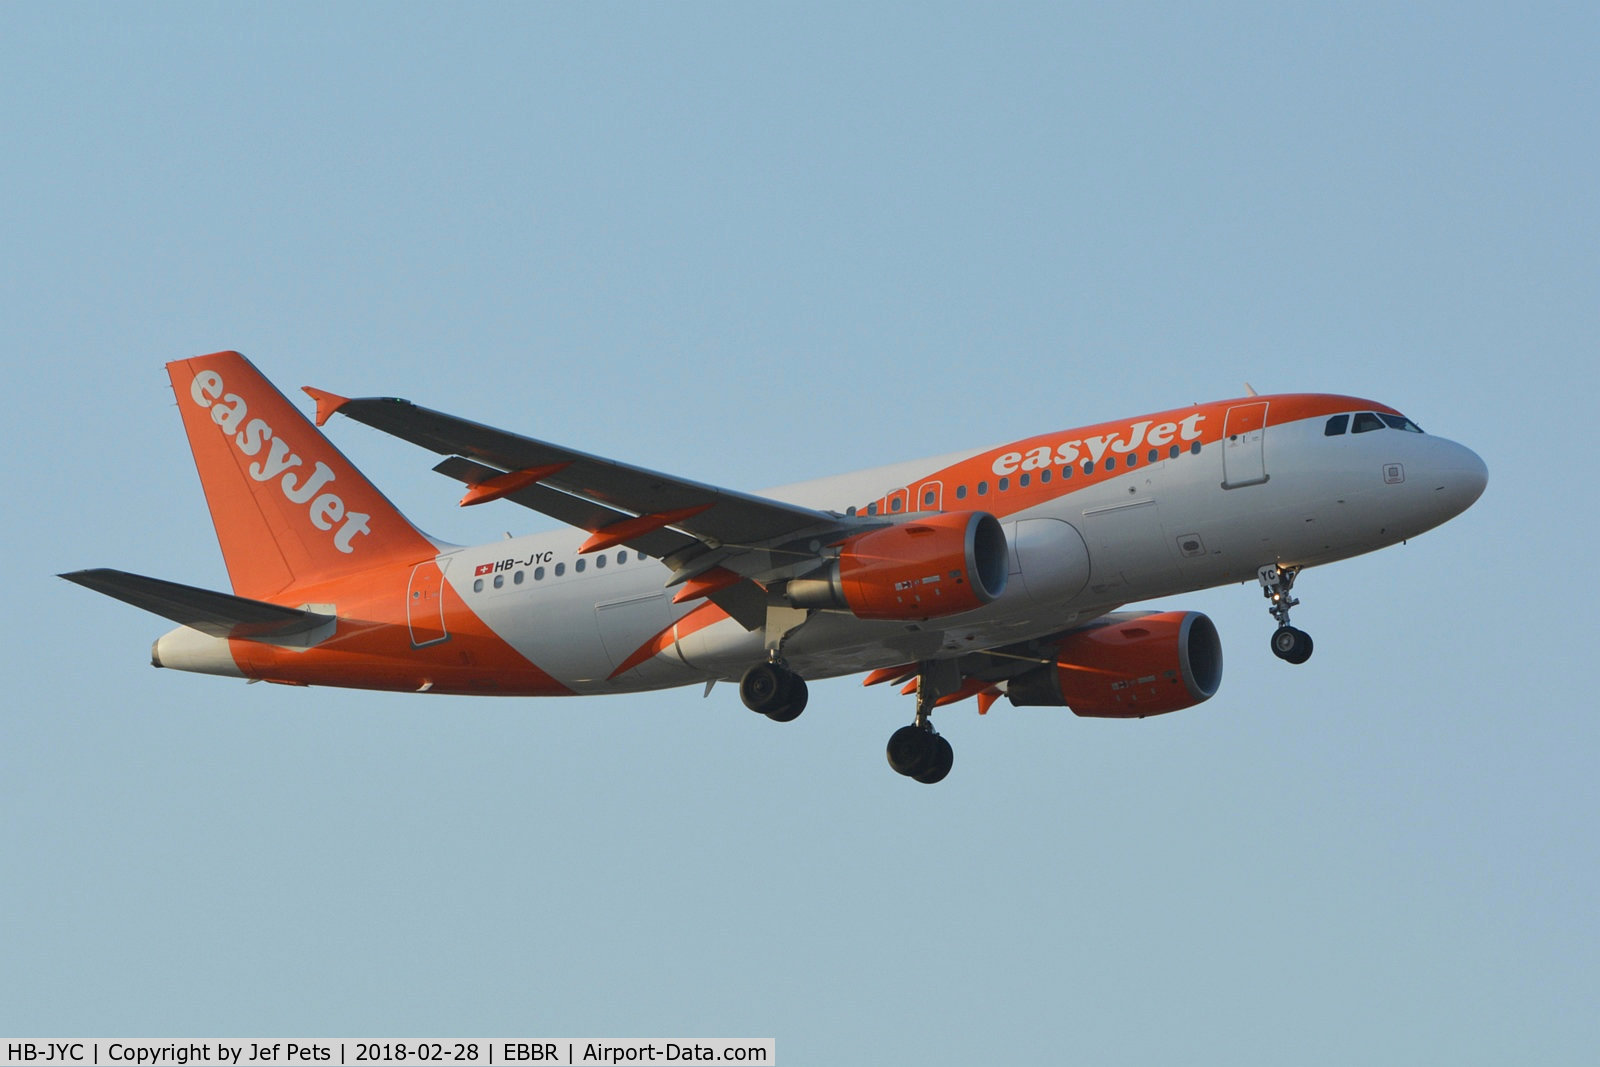 HB-JYC, 2011 Airbus A319-111 C/N 4785, Landing at Brussels.